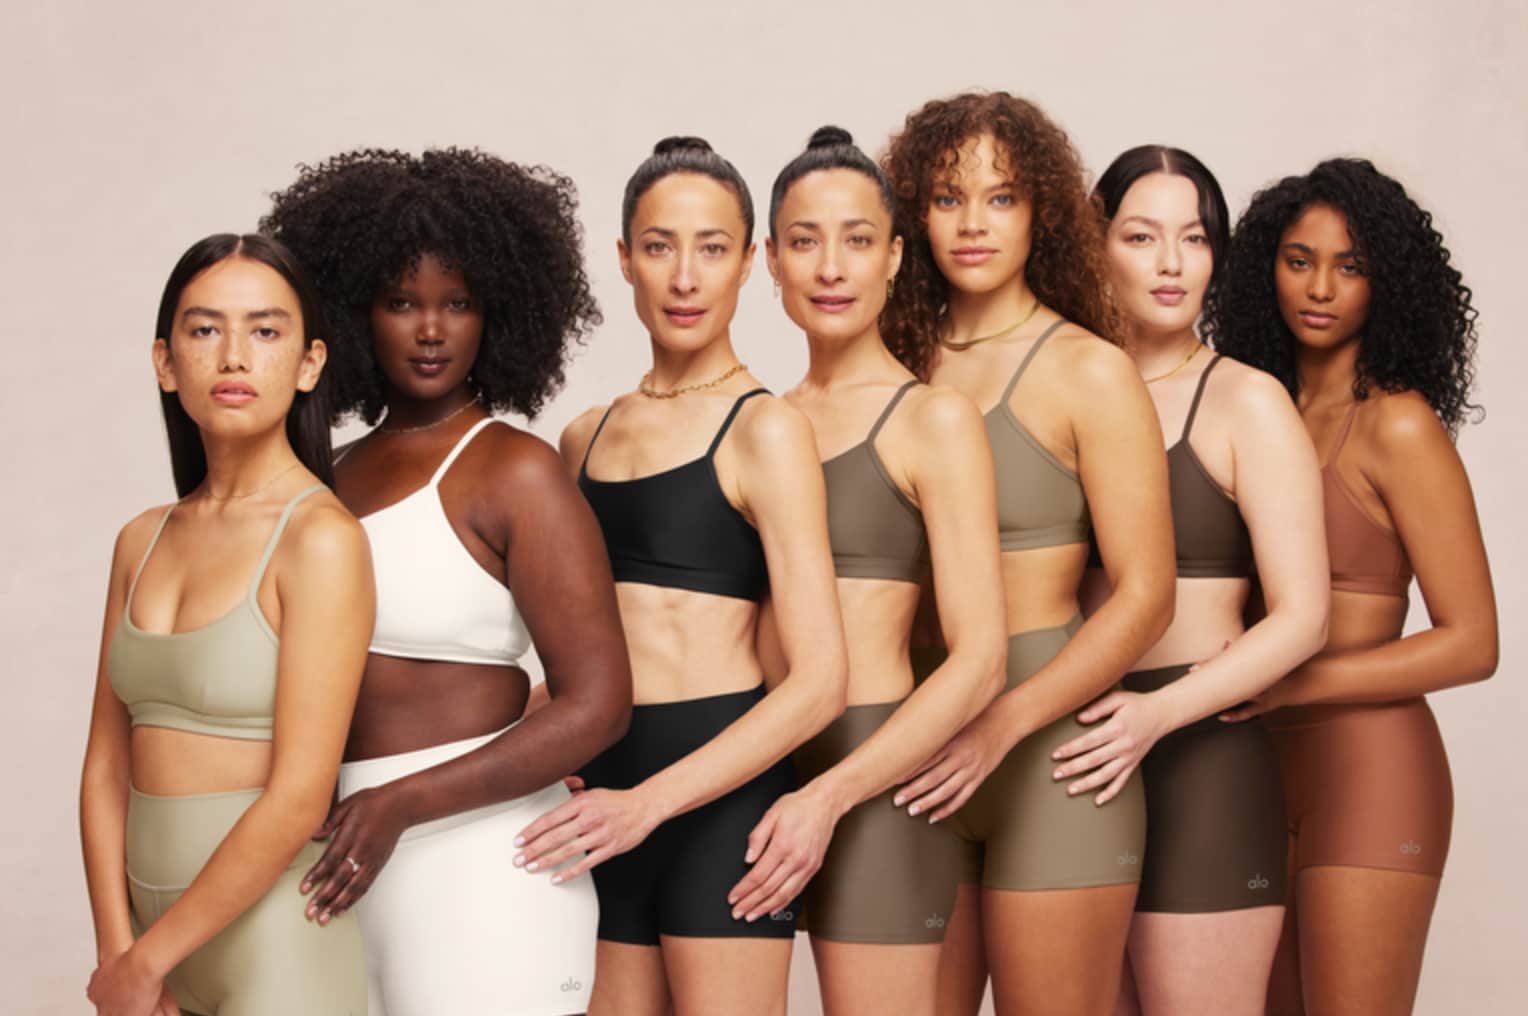 Introducing The Embody Collection by Alo